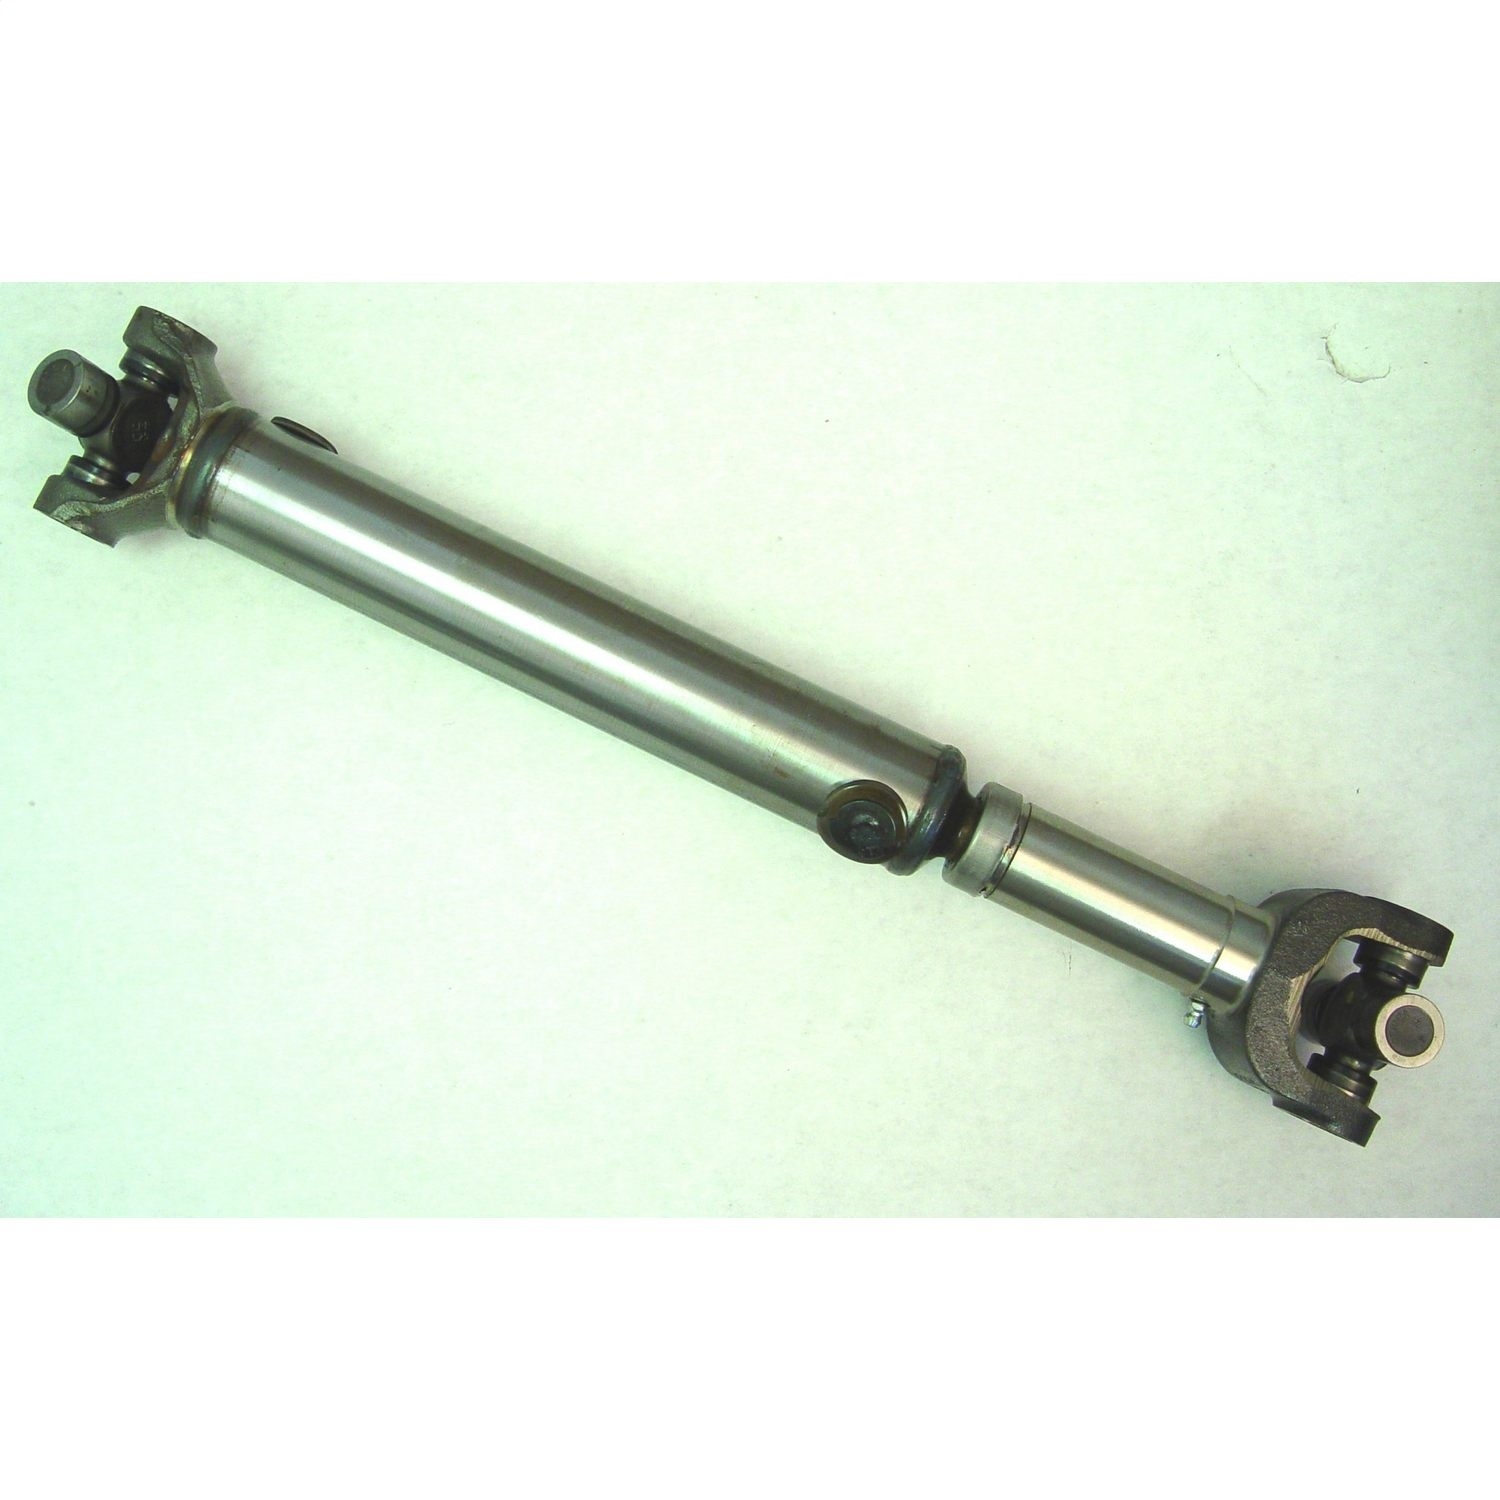 Omix This Stock Replacement Rear Driveshaft Fits 80-86 Jeep Cj7 With 4,6, Or 8-Cylinder Engines And